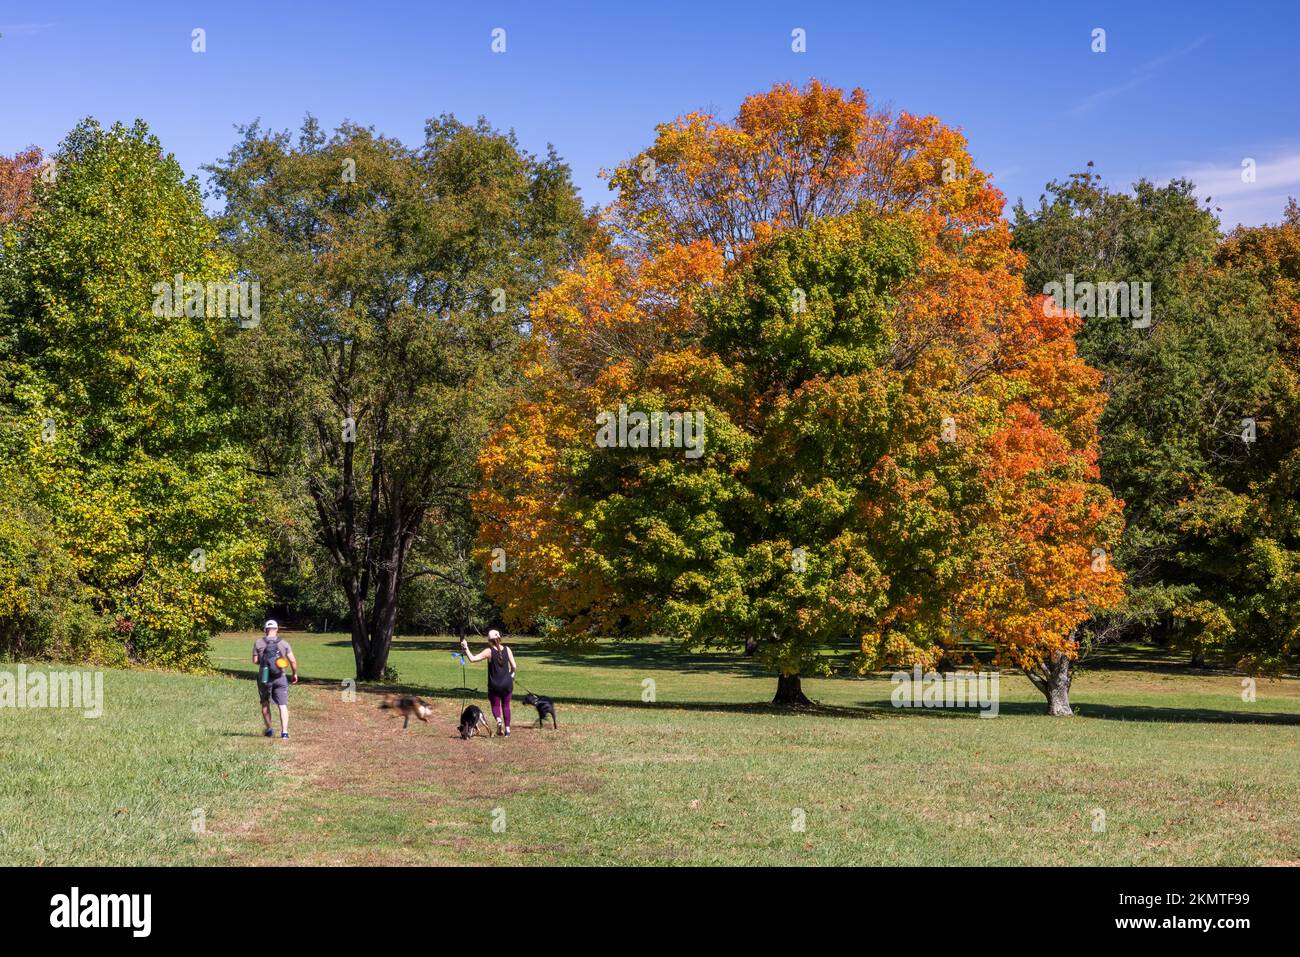 2 people and 3 dogs walking with maples changing colors in autumn, Brandywine Creek State Park, Delaware Stock Photo